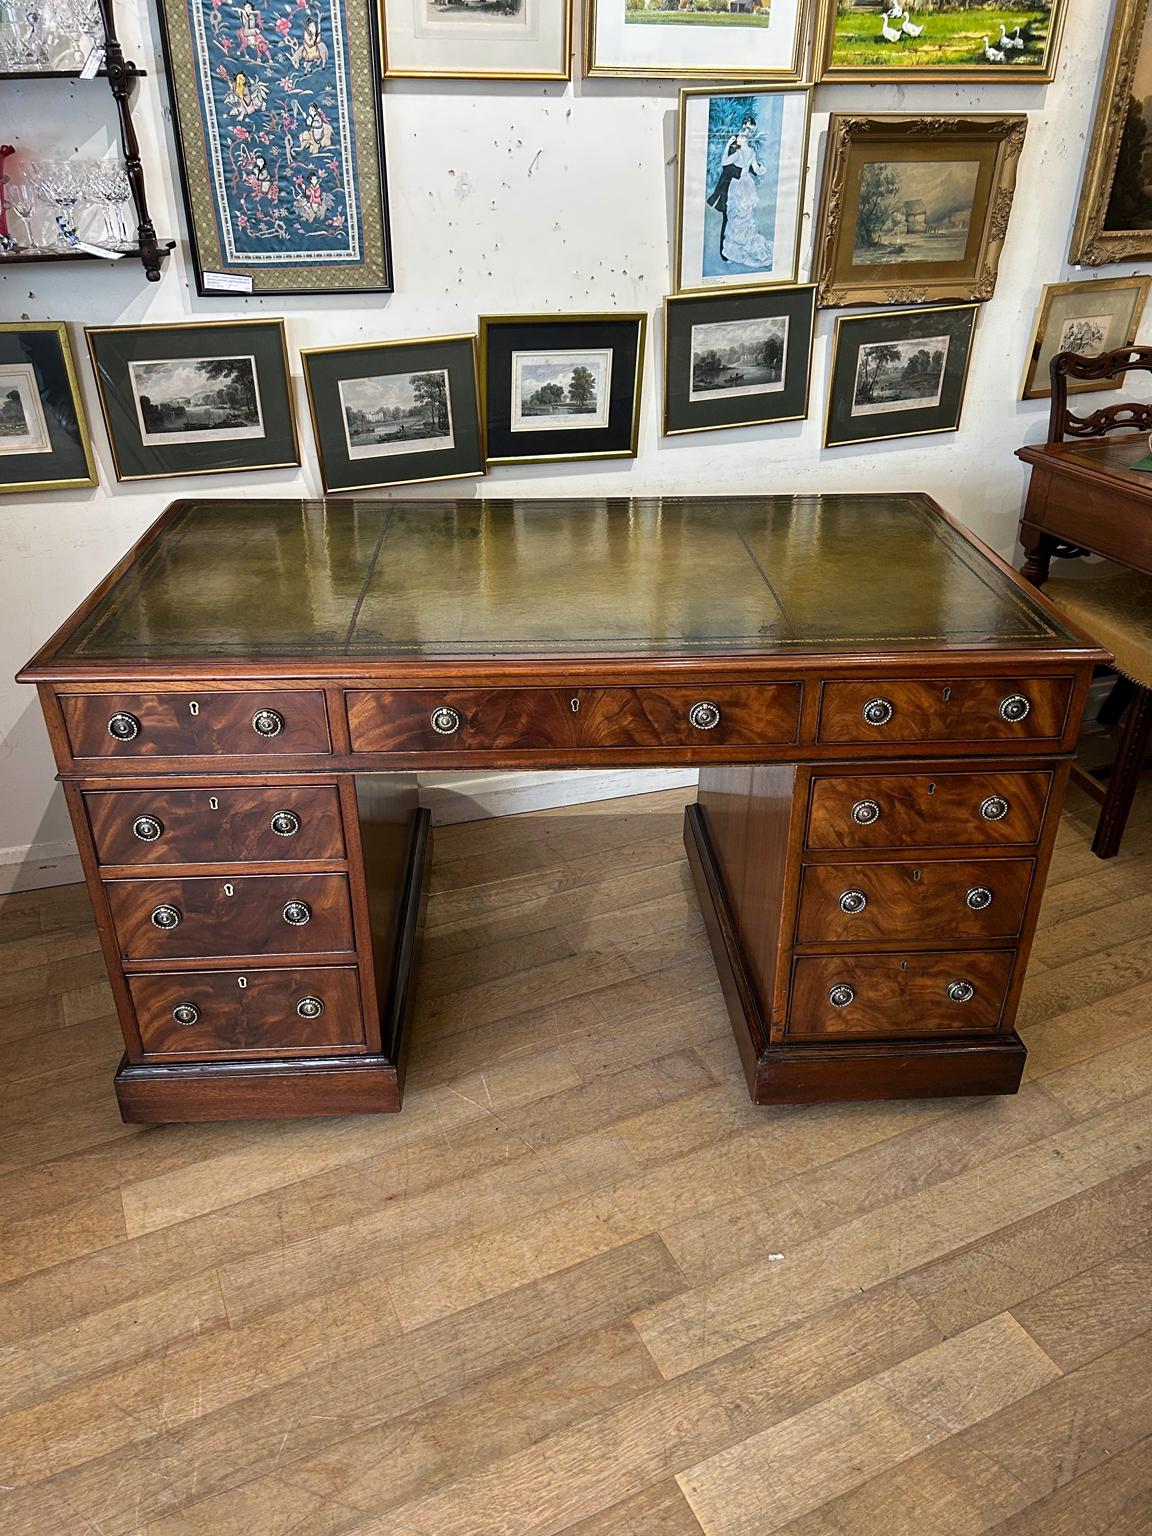 19th century Mahogany pedestal desk, the top with a leather writing surface and nine drawers, all with fitted with brass ring handles and oak lined drawers. Comes apart in three separate sections with working key.

circa: